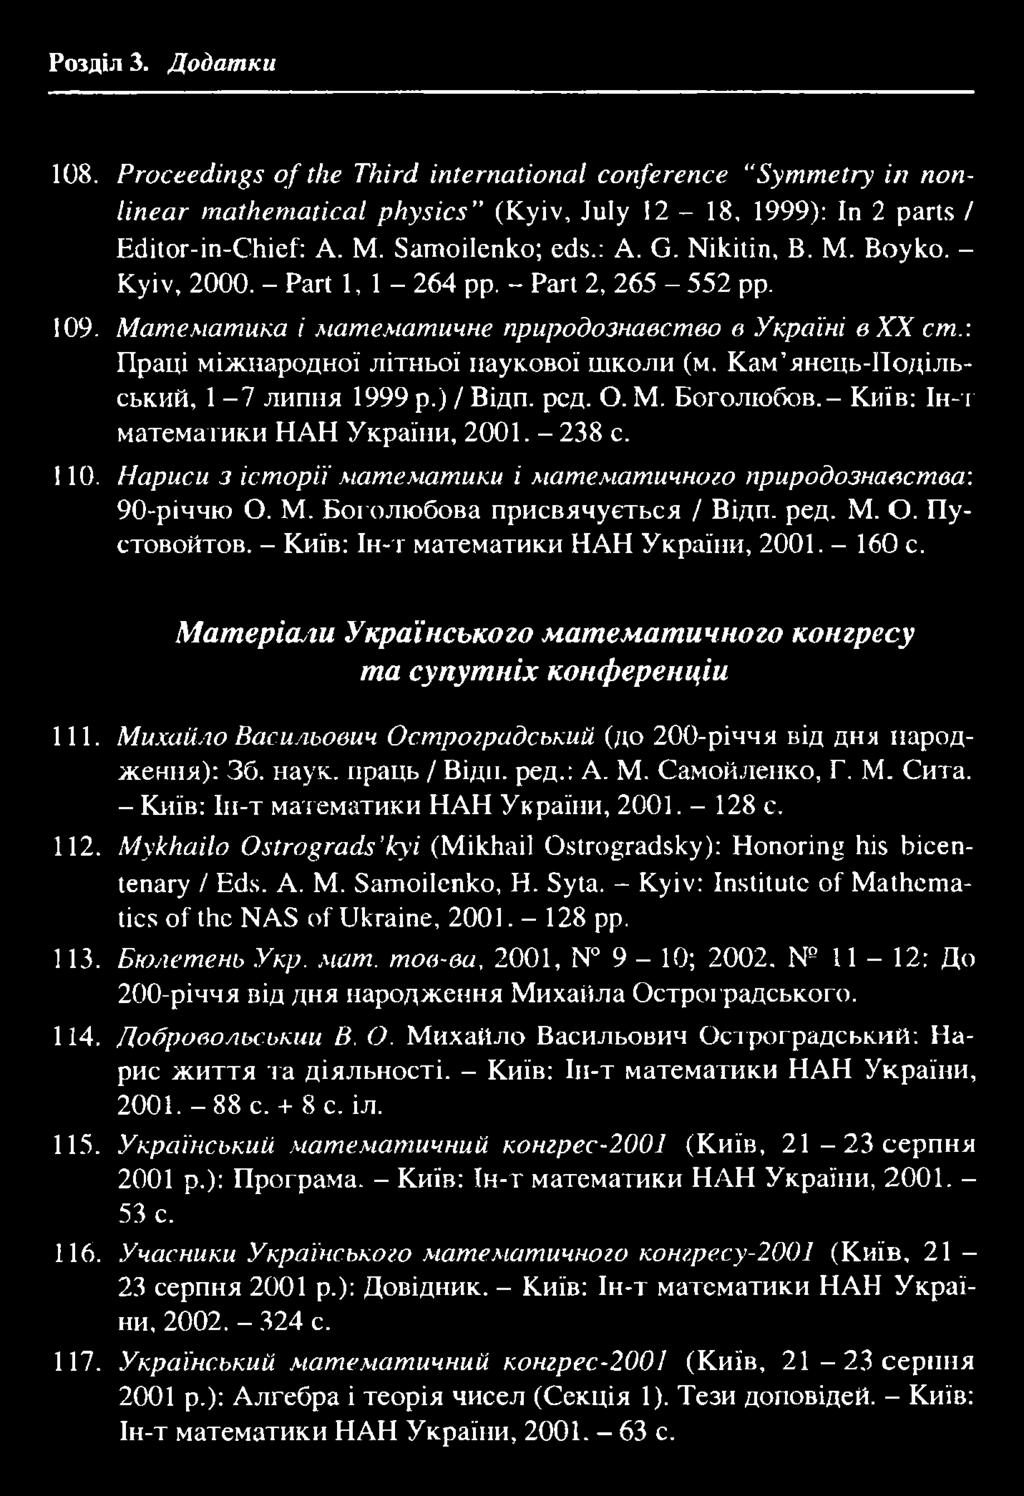 175 Розділ 3. Додатки 108. Proceedings of the Third international conference "Symmetry in nonlinear mathematical physics" (Kyiv, July 12-18, 1999): In 2 parts / Editor-in-Chief: A. M. Samoilenko; eds.